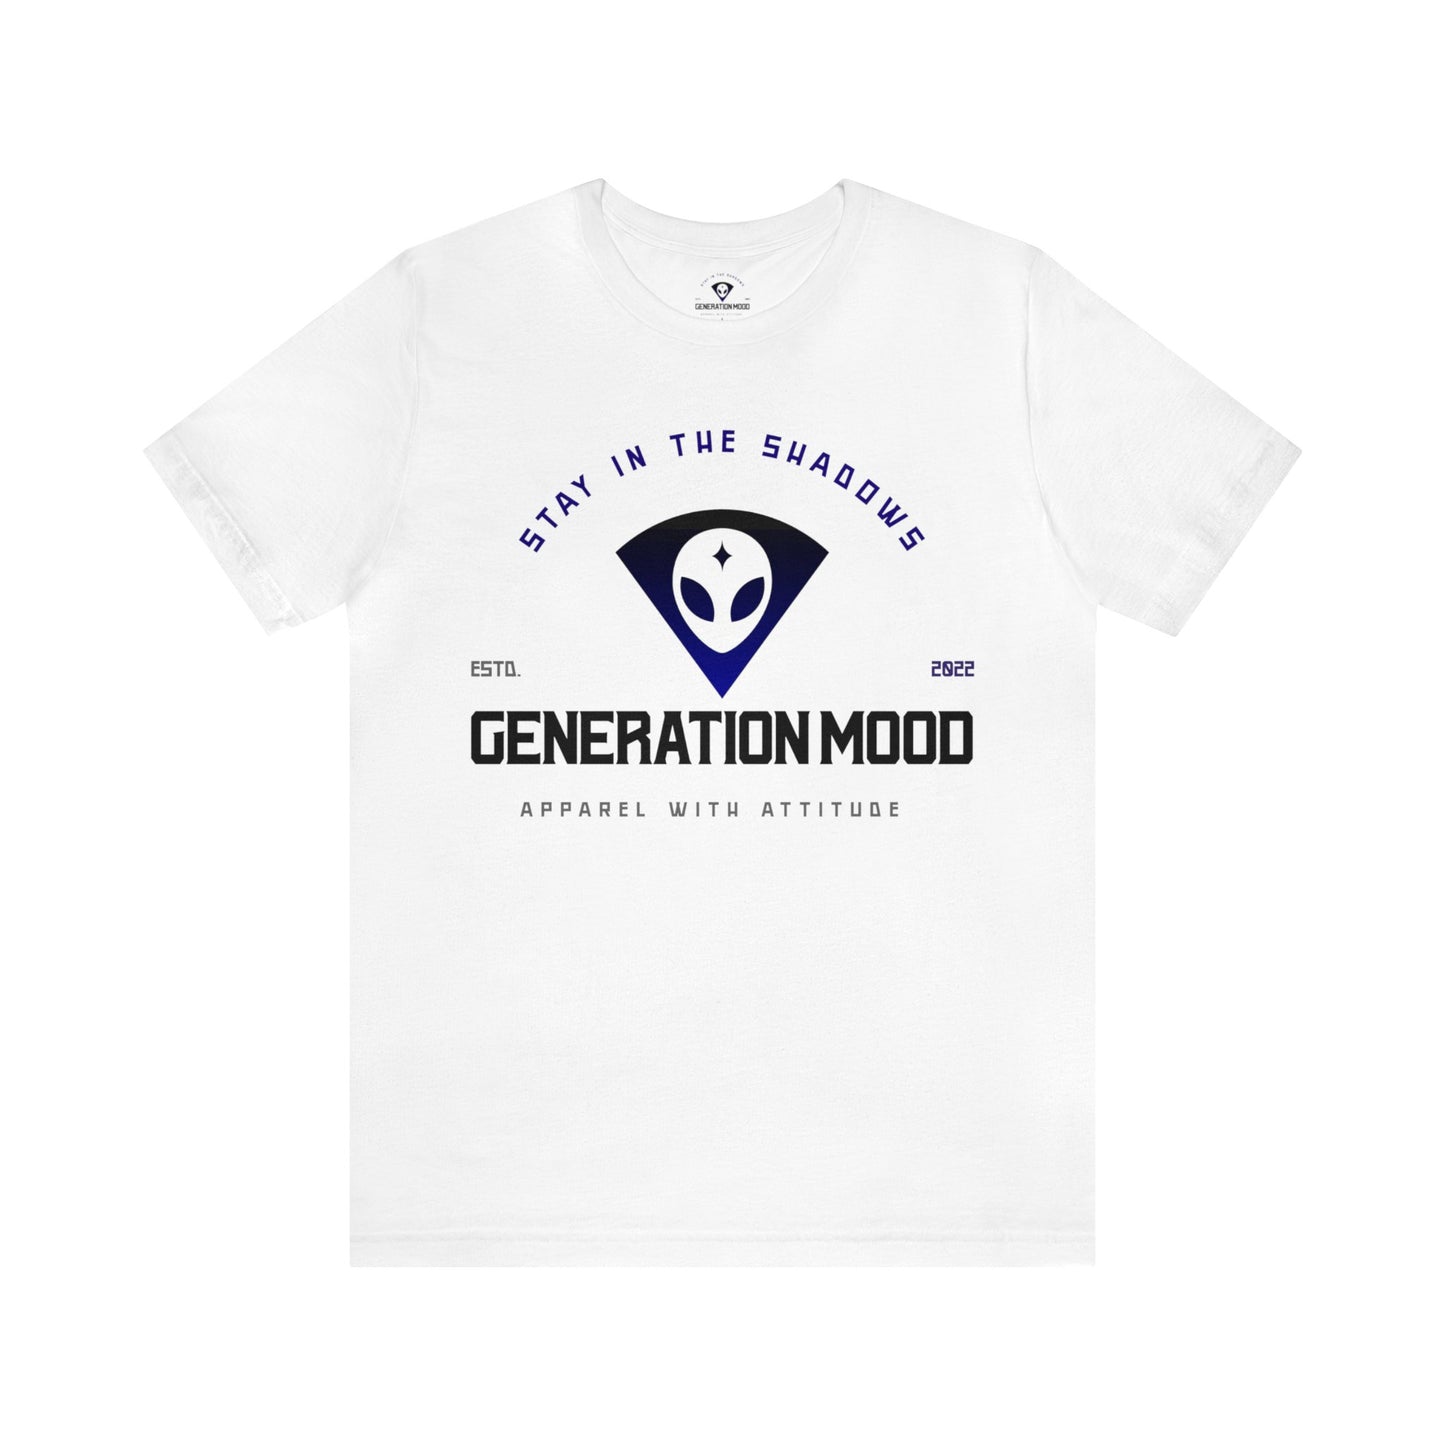 Are you ready to channel your inner cosmic wanderer? Our exclusive Generation Mood logo alien t-shirt combines nostalgia and a dash of intergalactic cool. Whether you are a believer in little beings or just love a good logo tee, this shirt is for you. In White